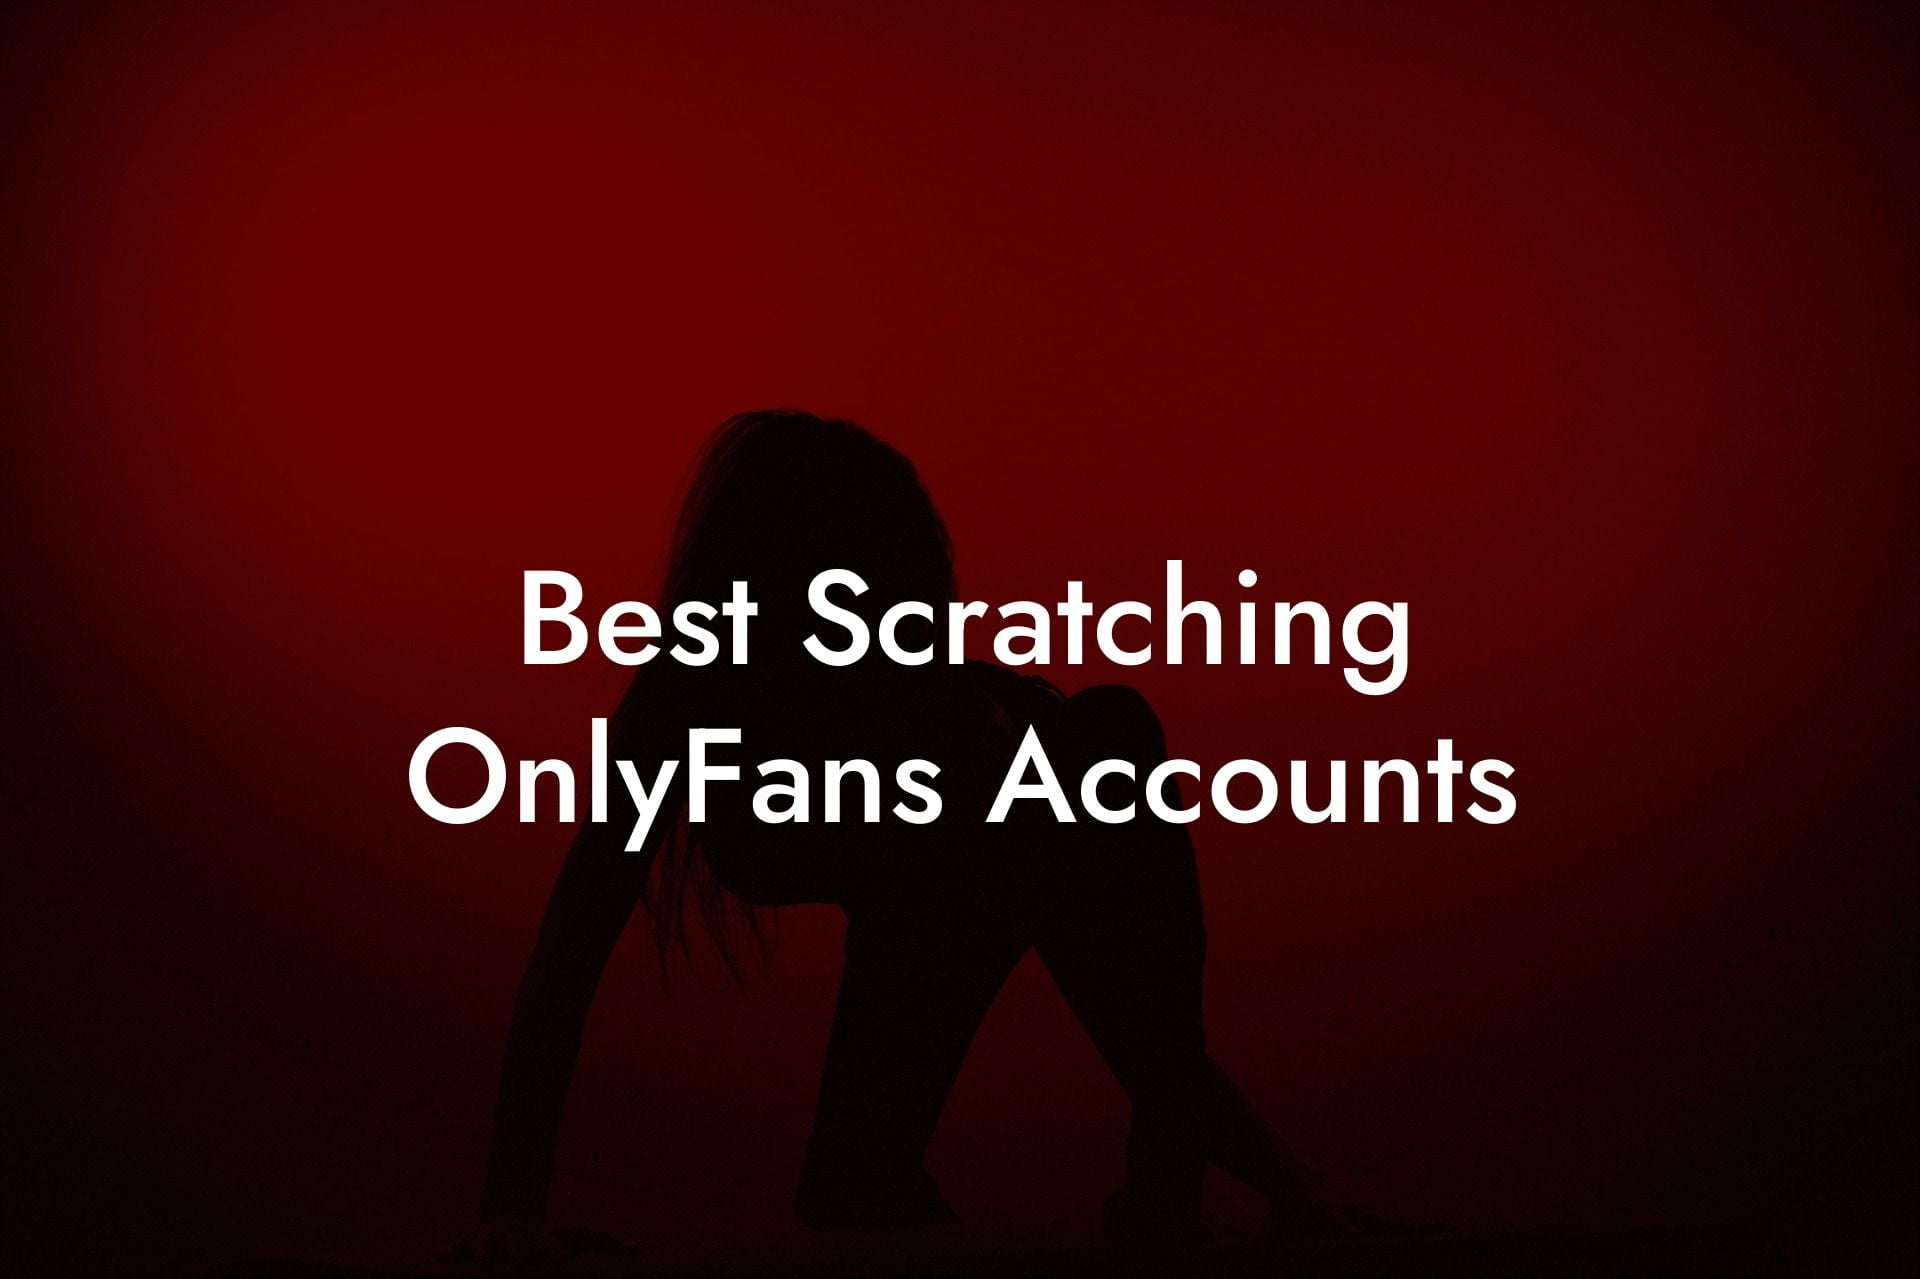 Best Scratching OnlyFans Accounts